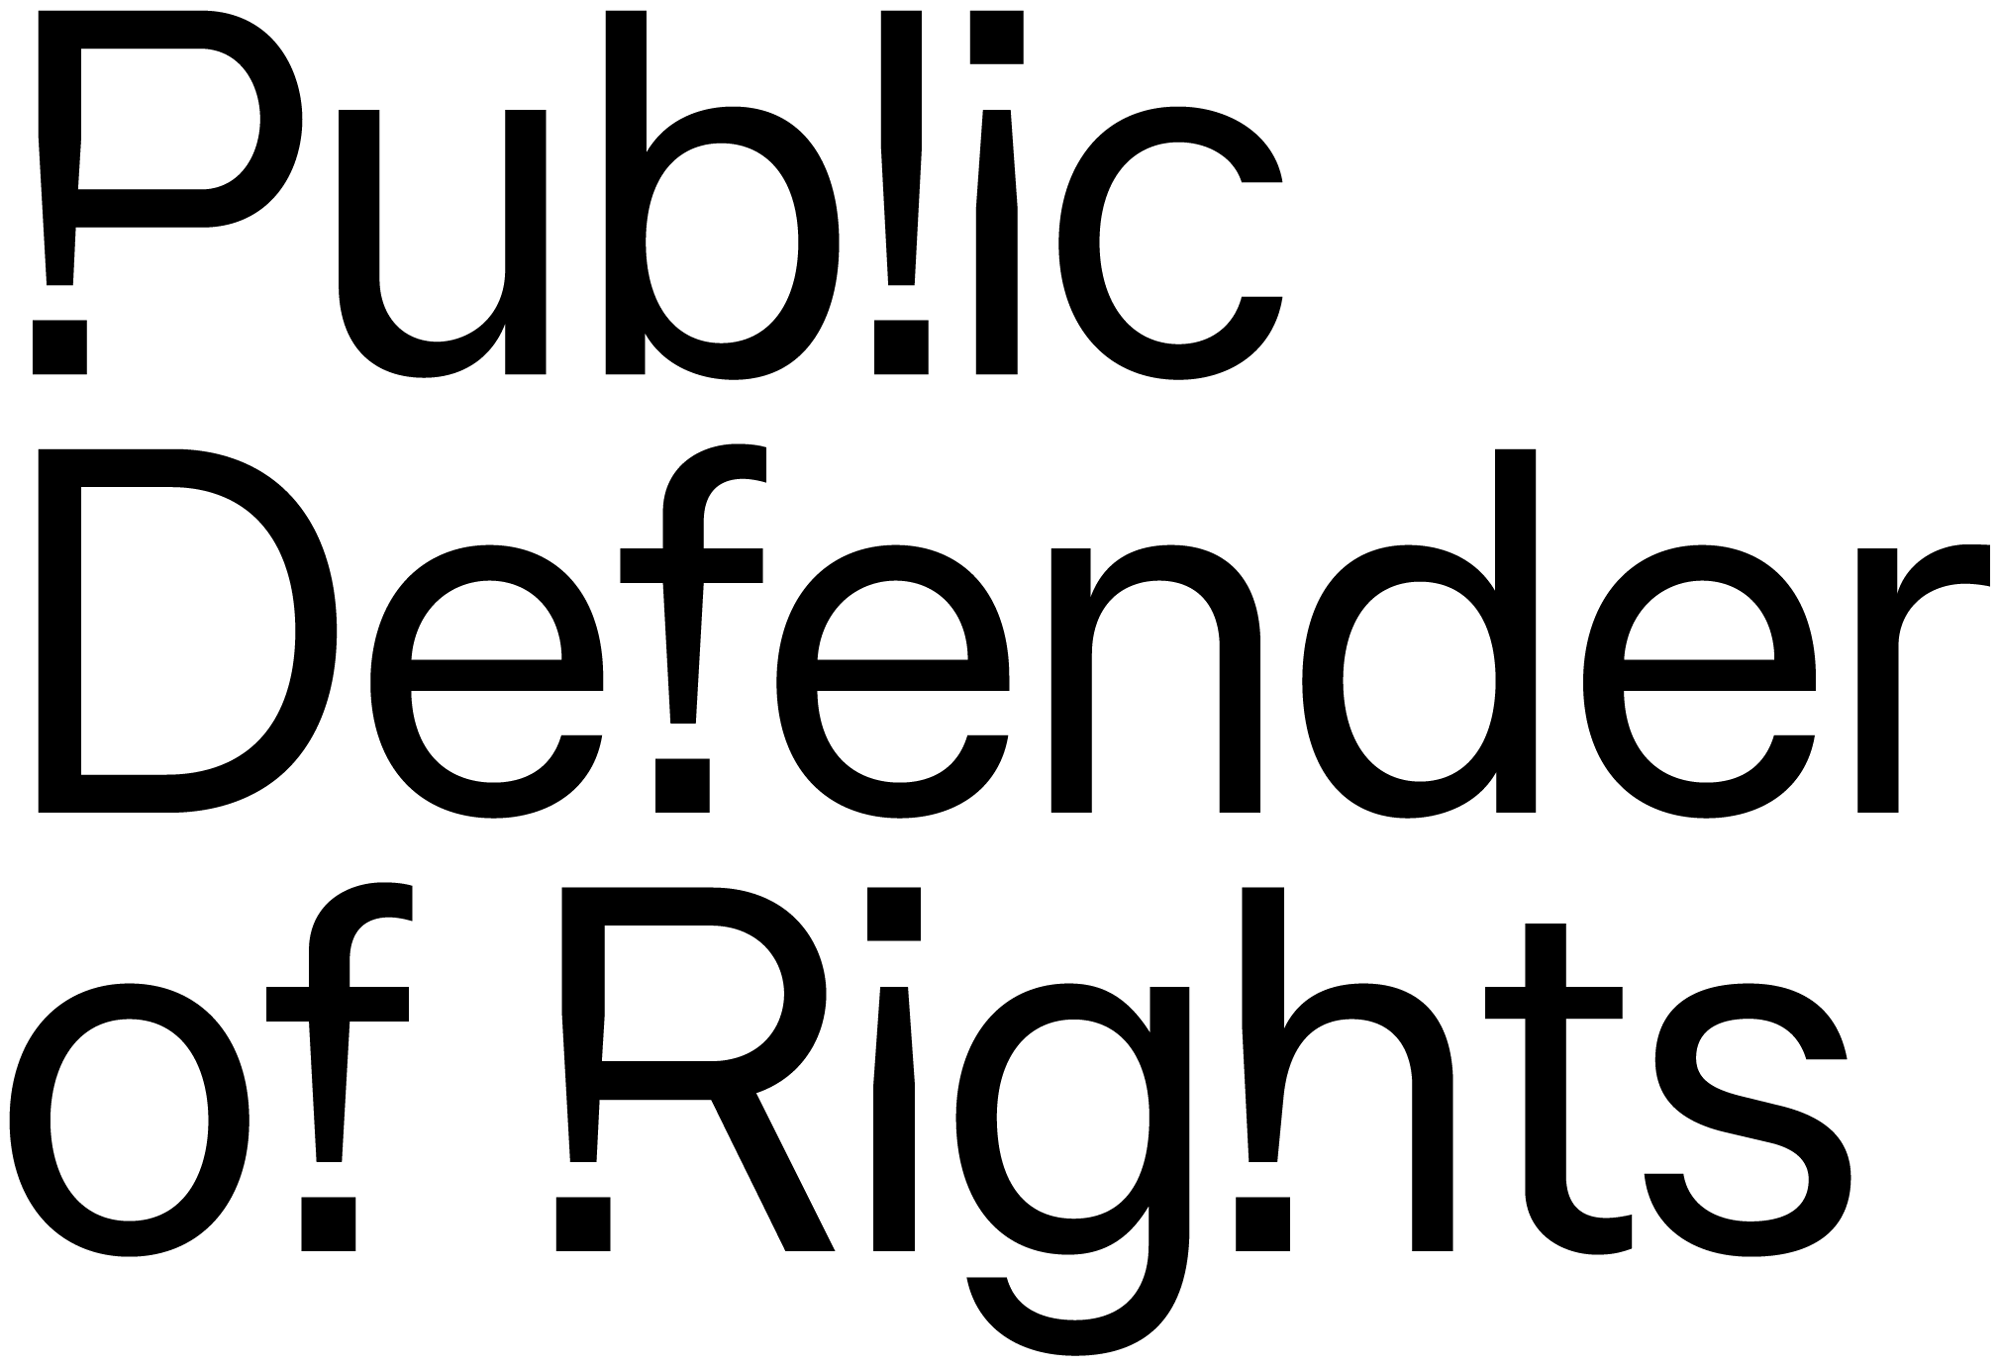 New Logo and Identity for Slovak Public Defender of Rights by Andrej & Andrej